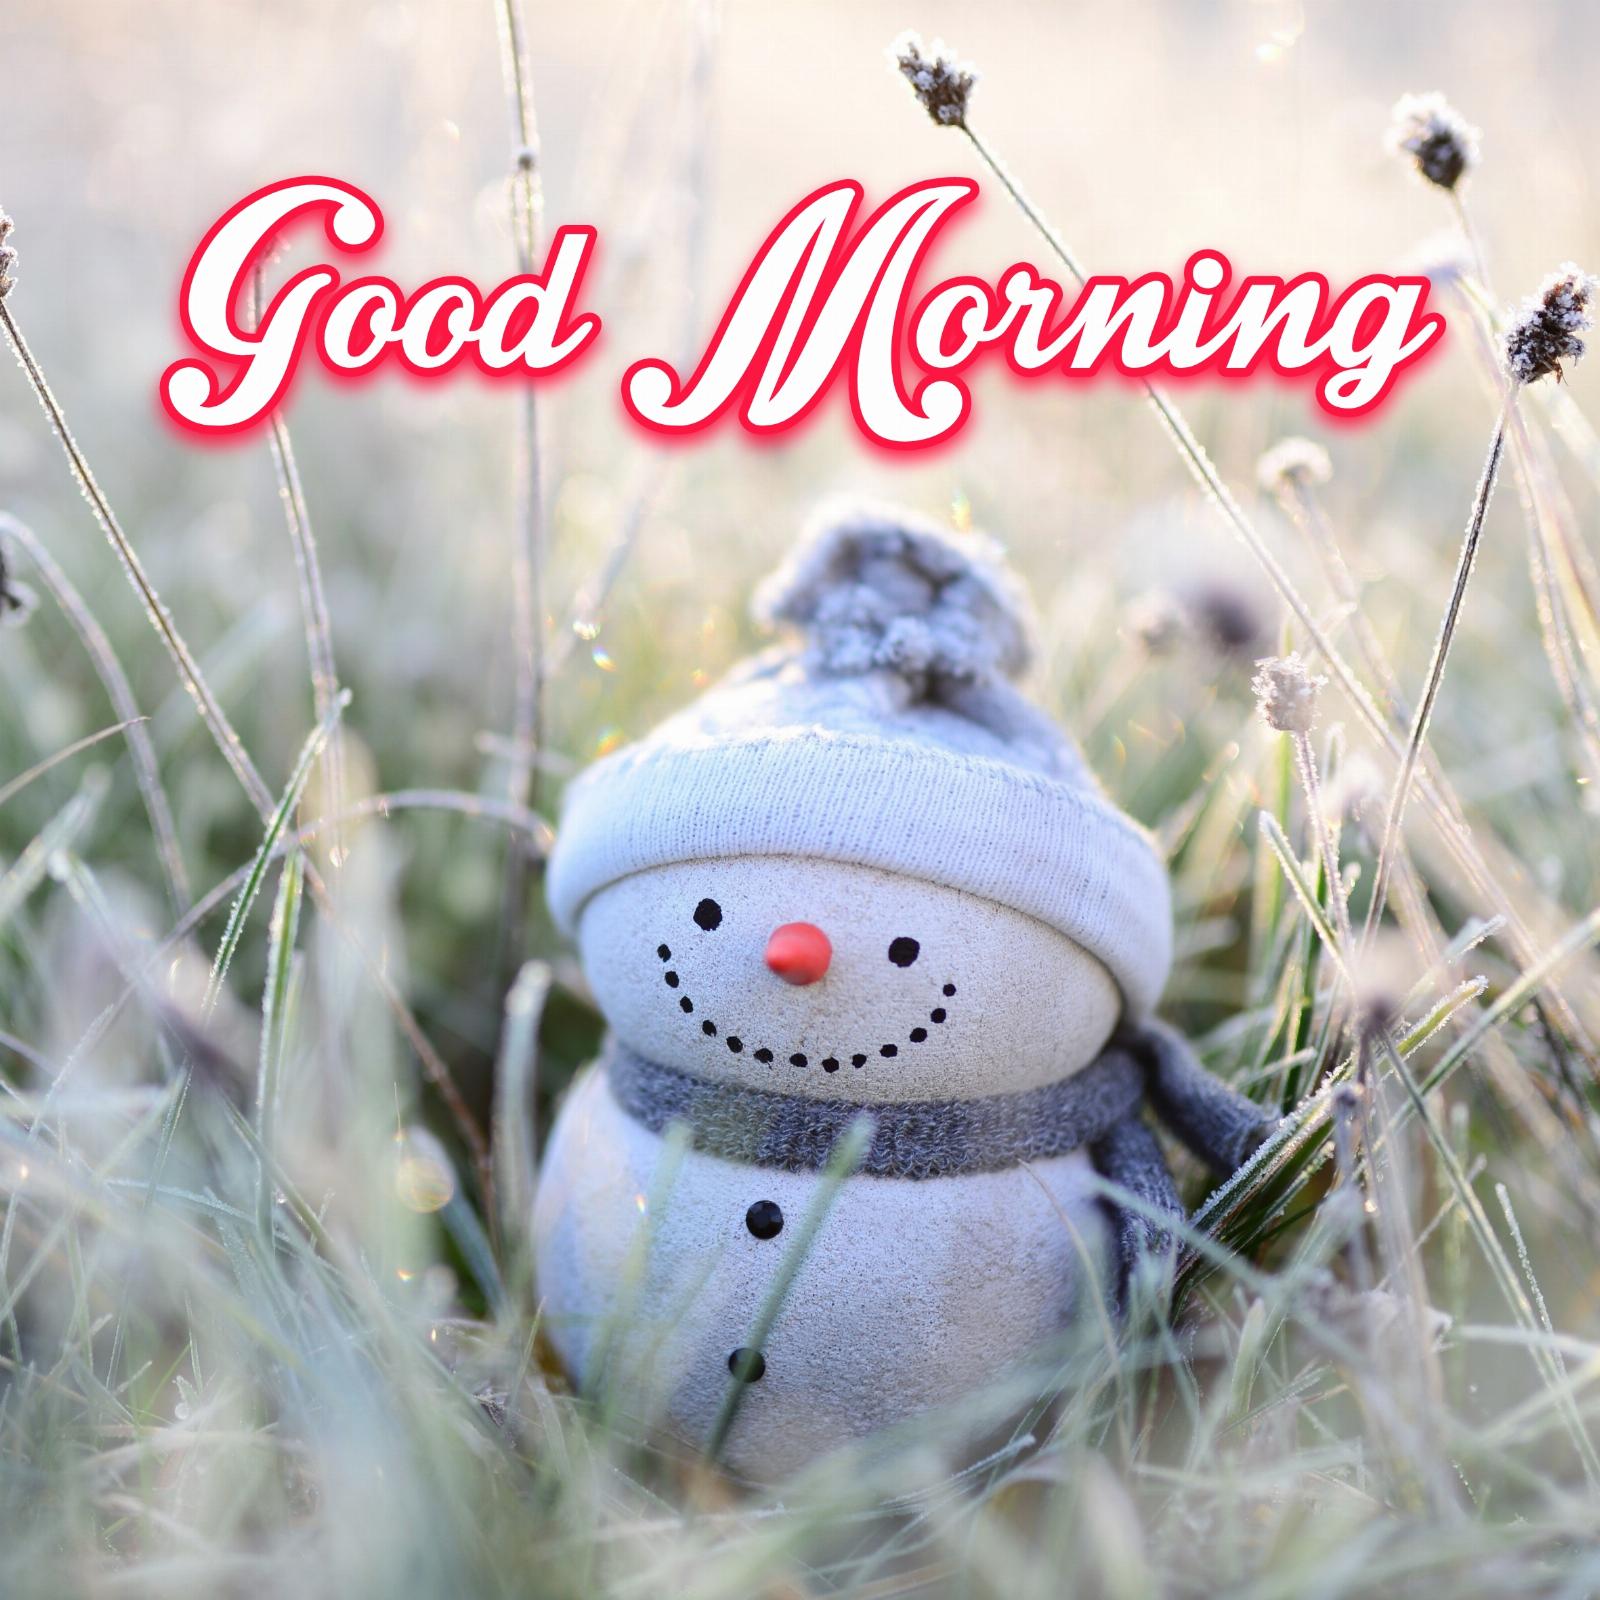 Cute Good Morning Winter Images